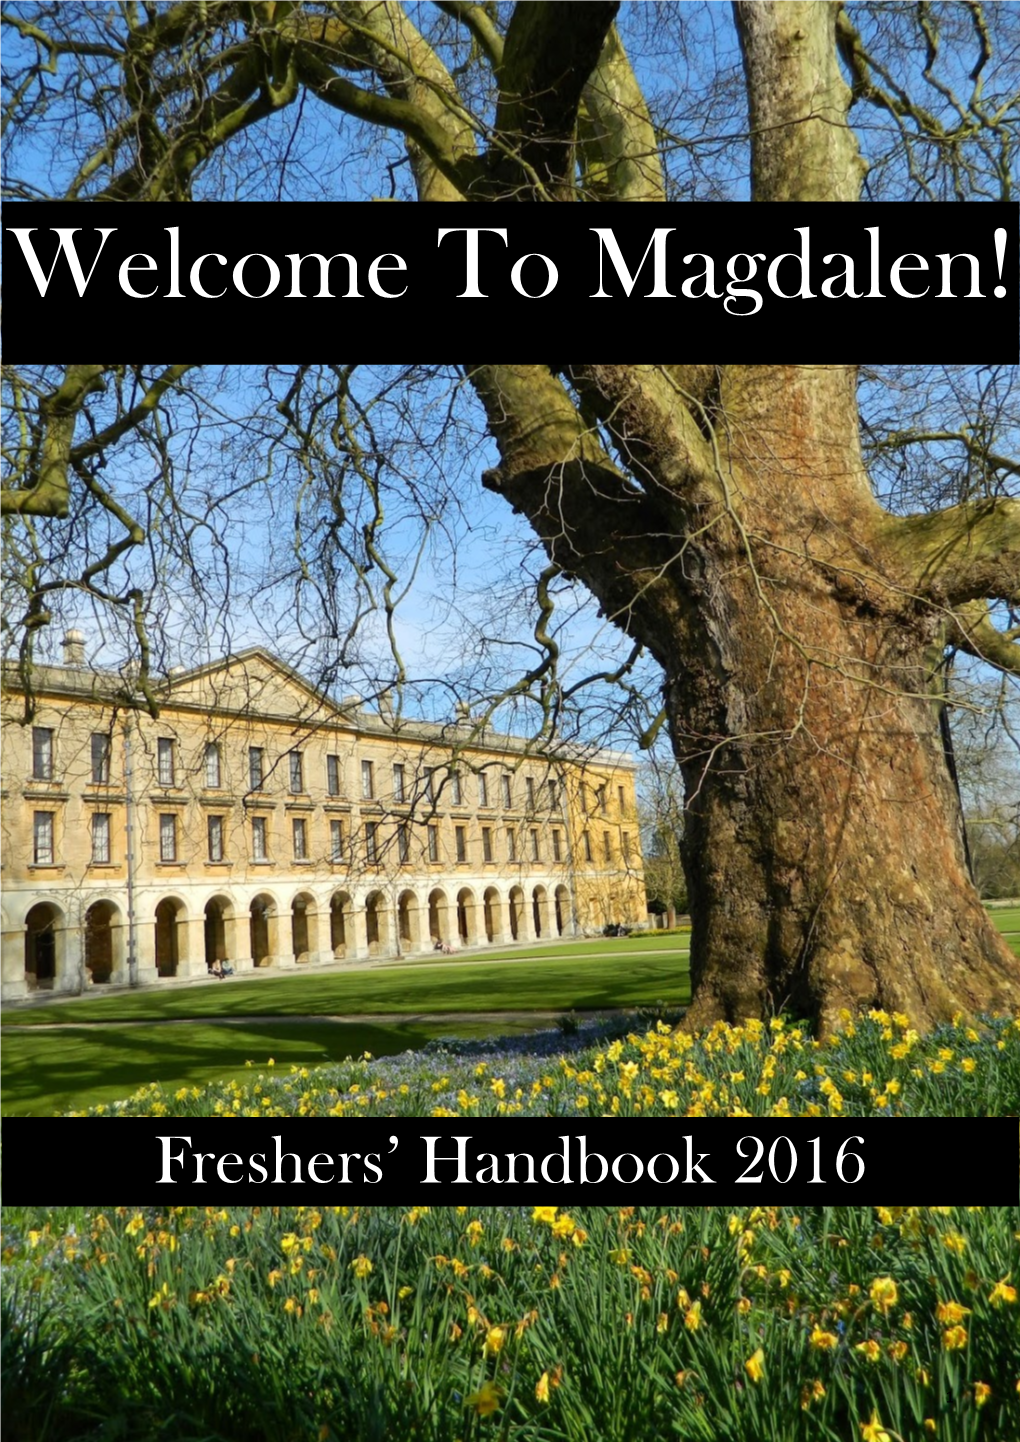 Welcome to Magdalen!